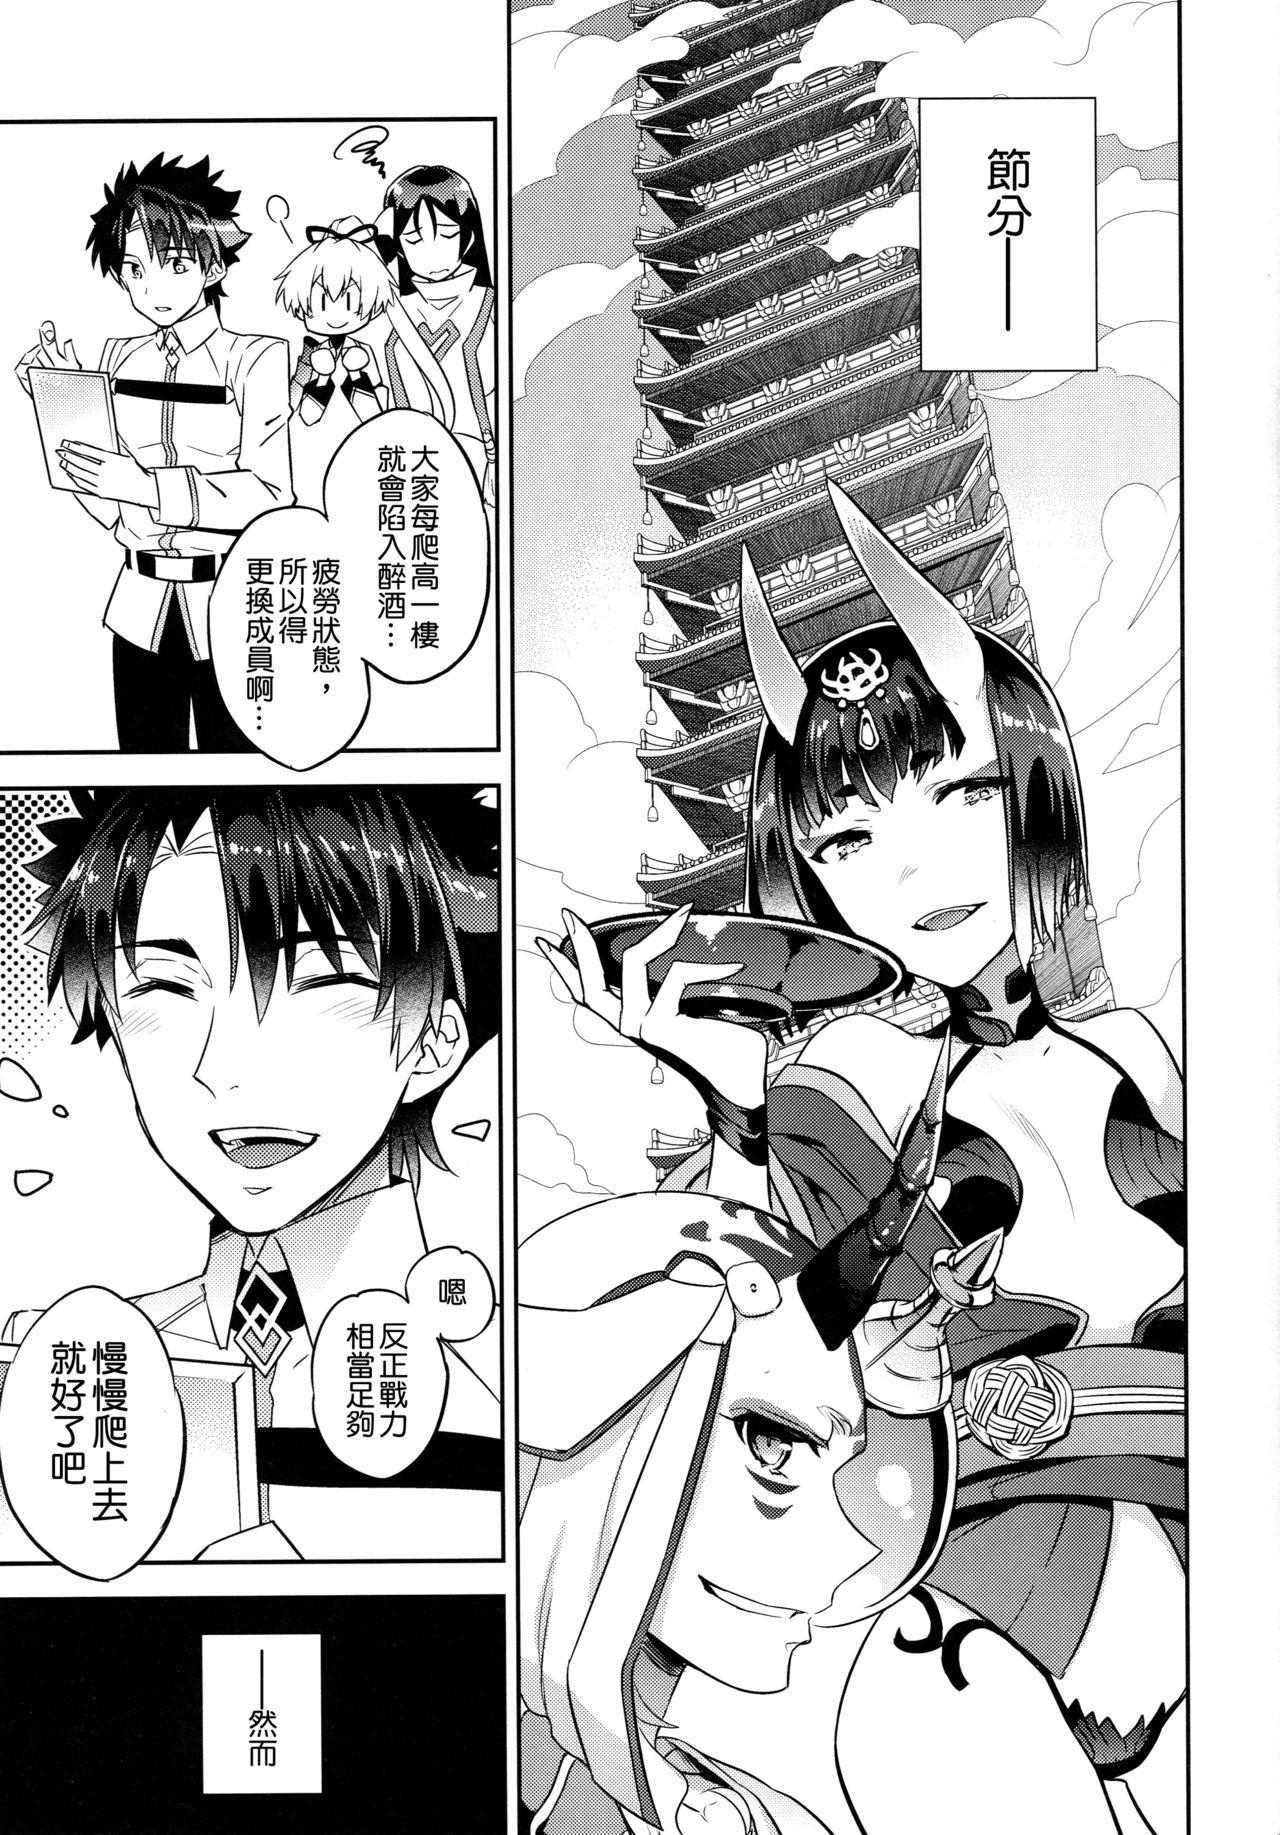 Hot Girl Fuck (C94) [Crazy9 (Ichitaka)] C9-36 Jeanne Alter-chan to Yopparai Onsen (Fate/Grand Order) [Chinese] [空気系☆漢化] - Fate grand order Gay Medical - Page 4